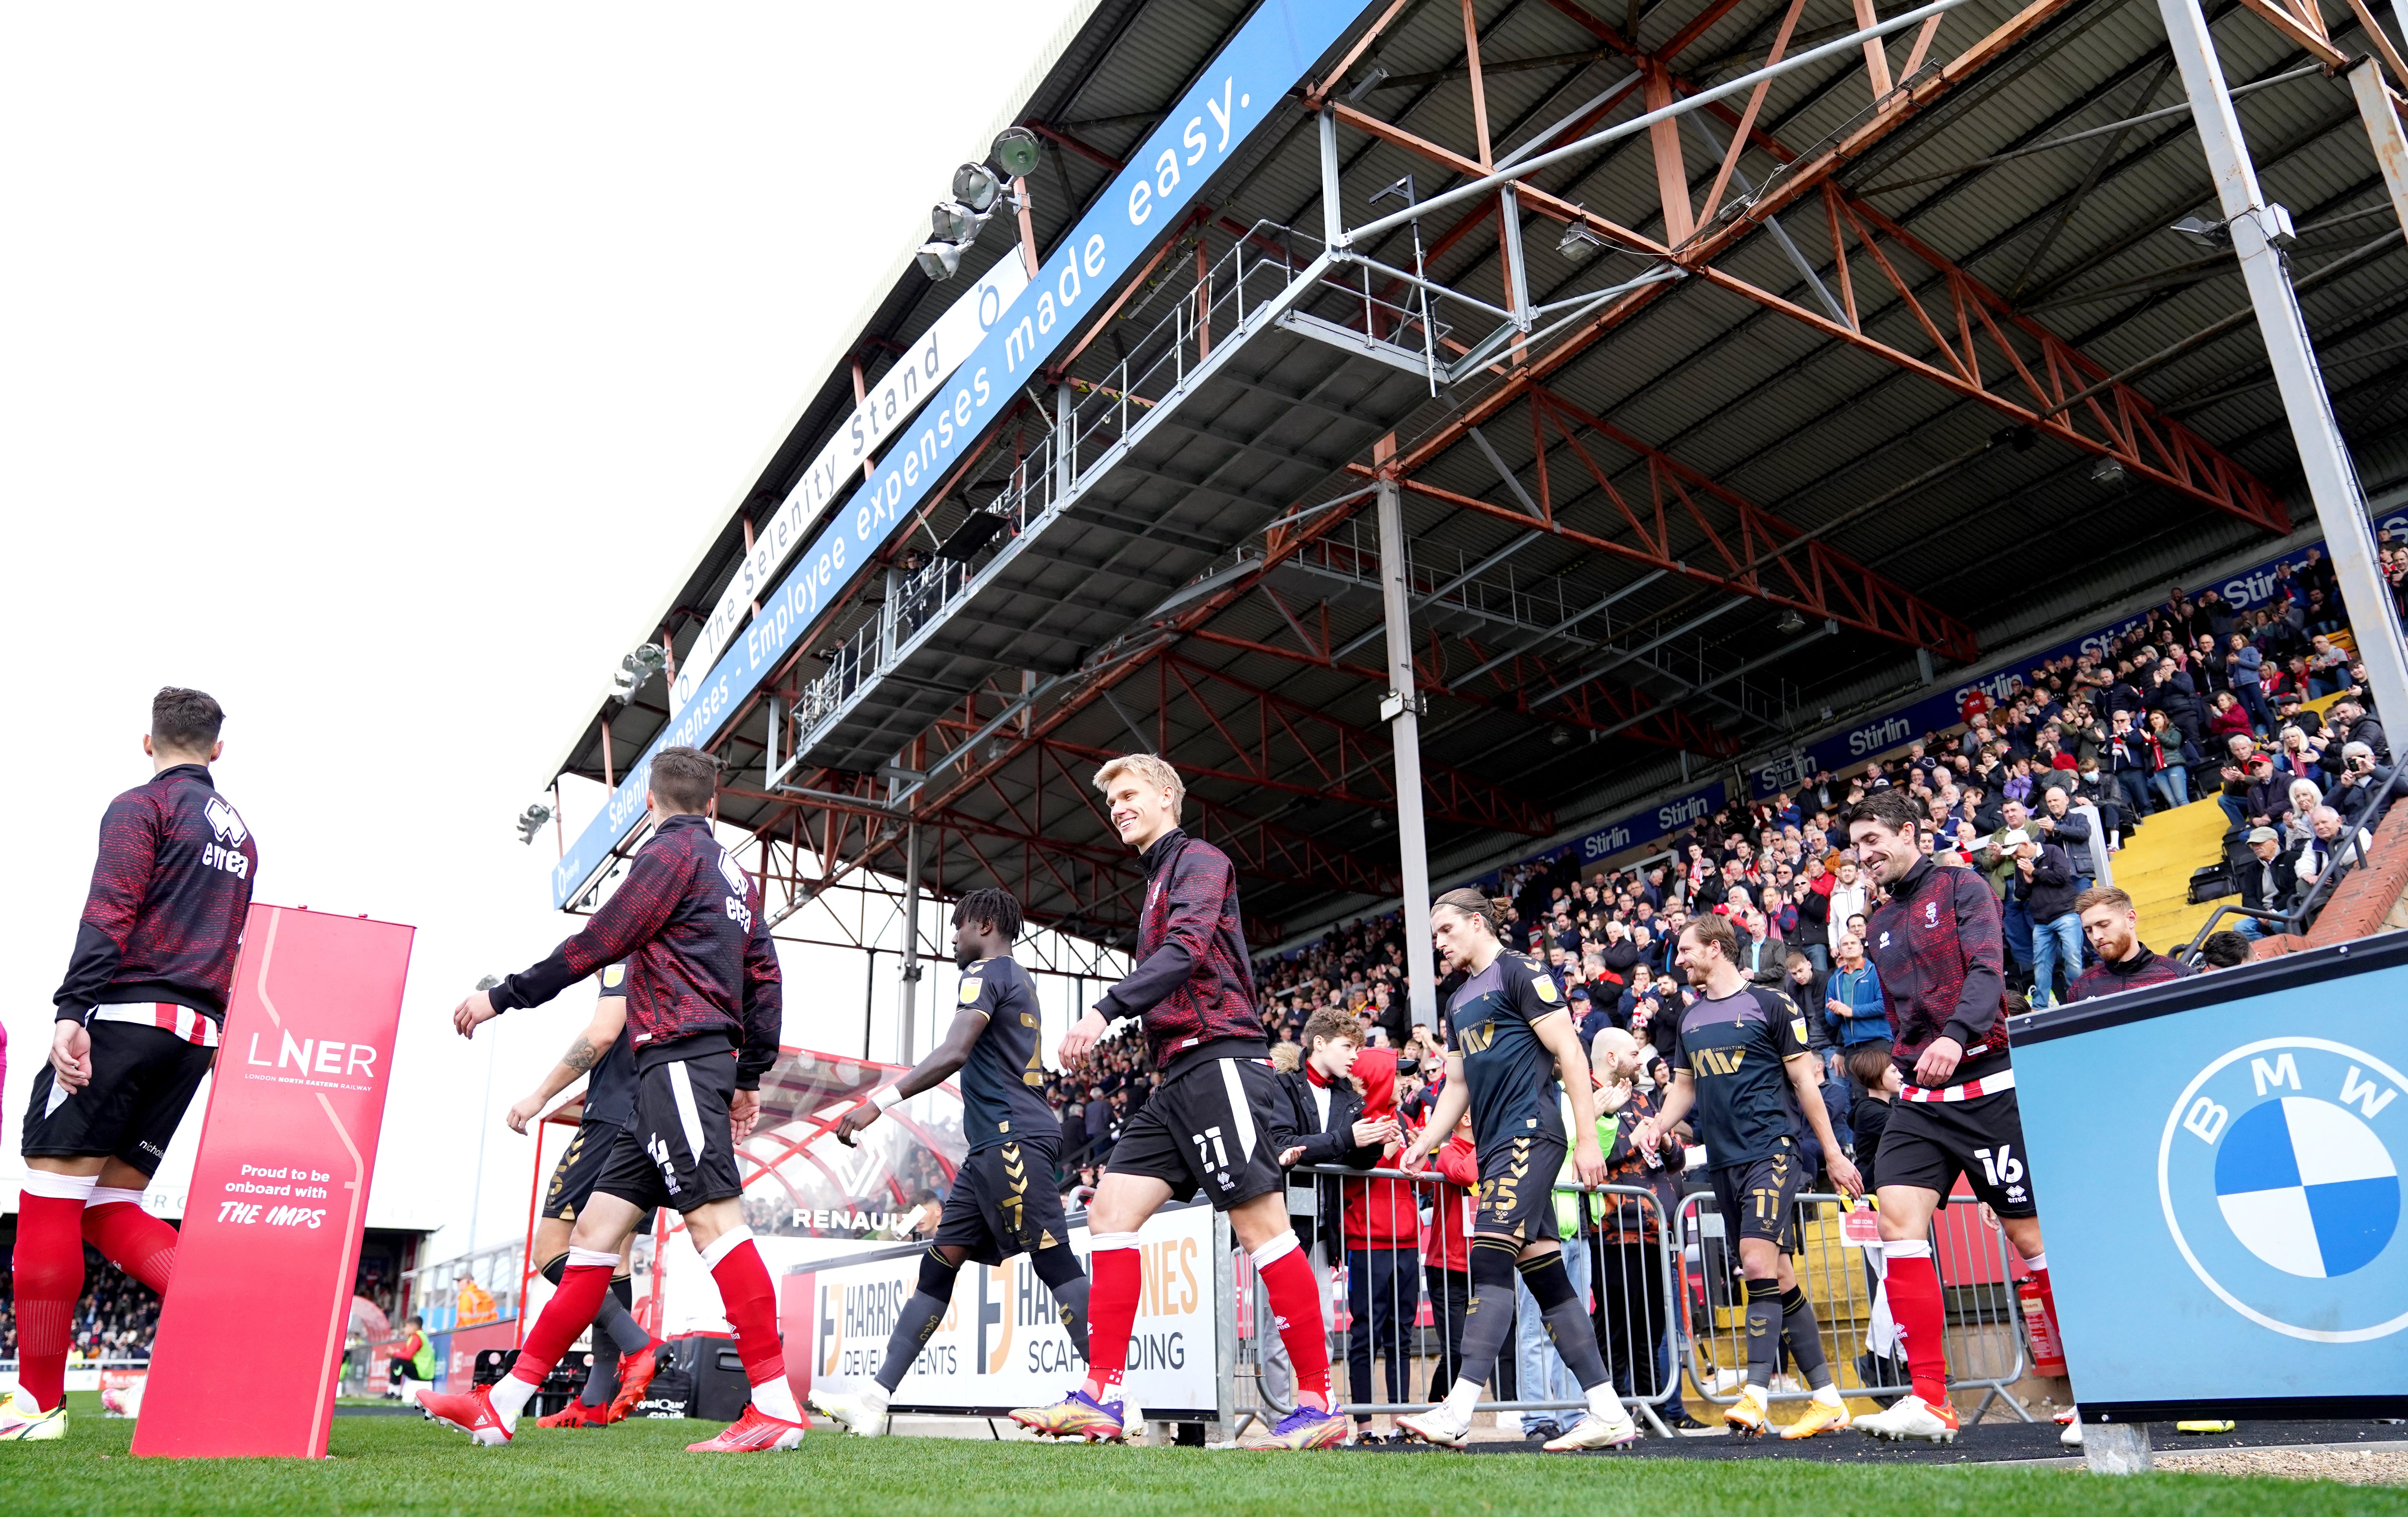 Players at Lincoln’s home ground (Tim Goode/PA)